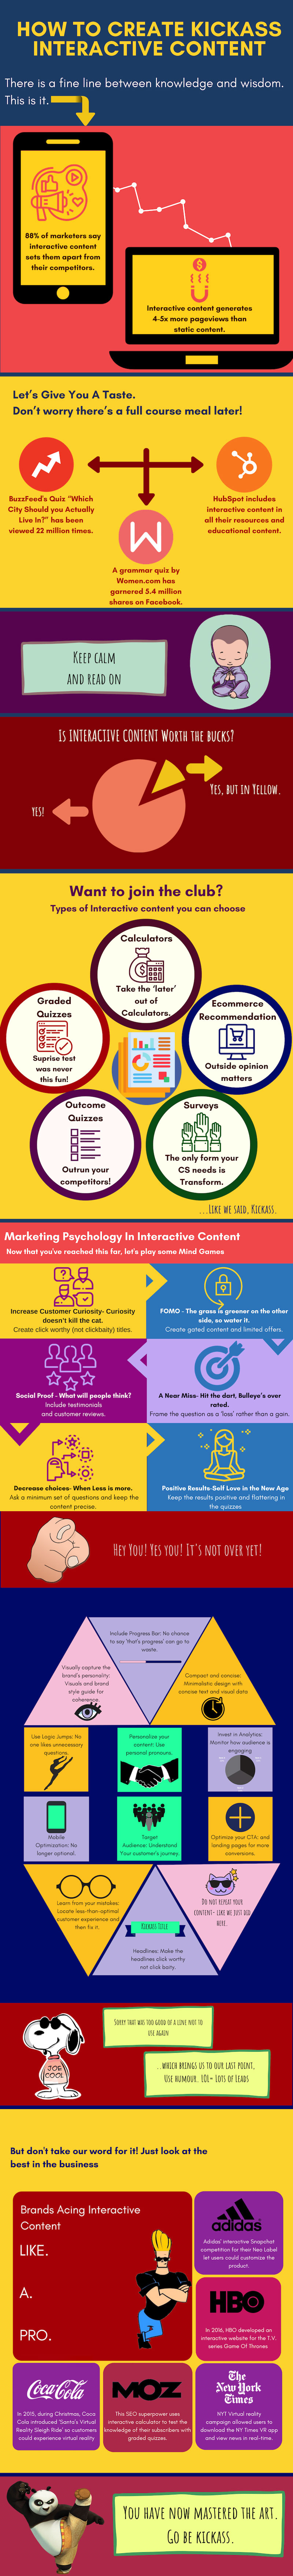 Interactive Content Infographic